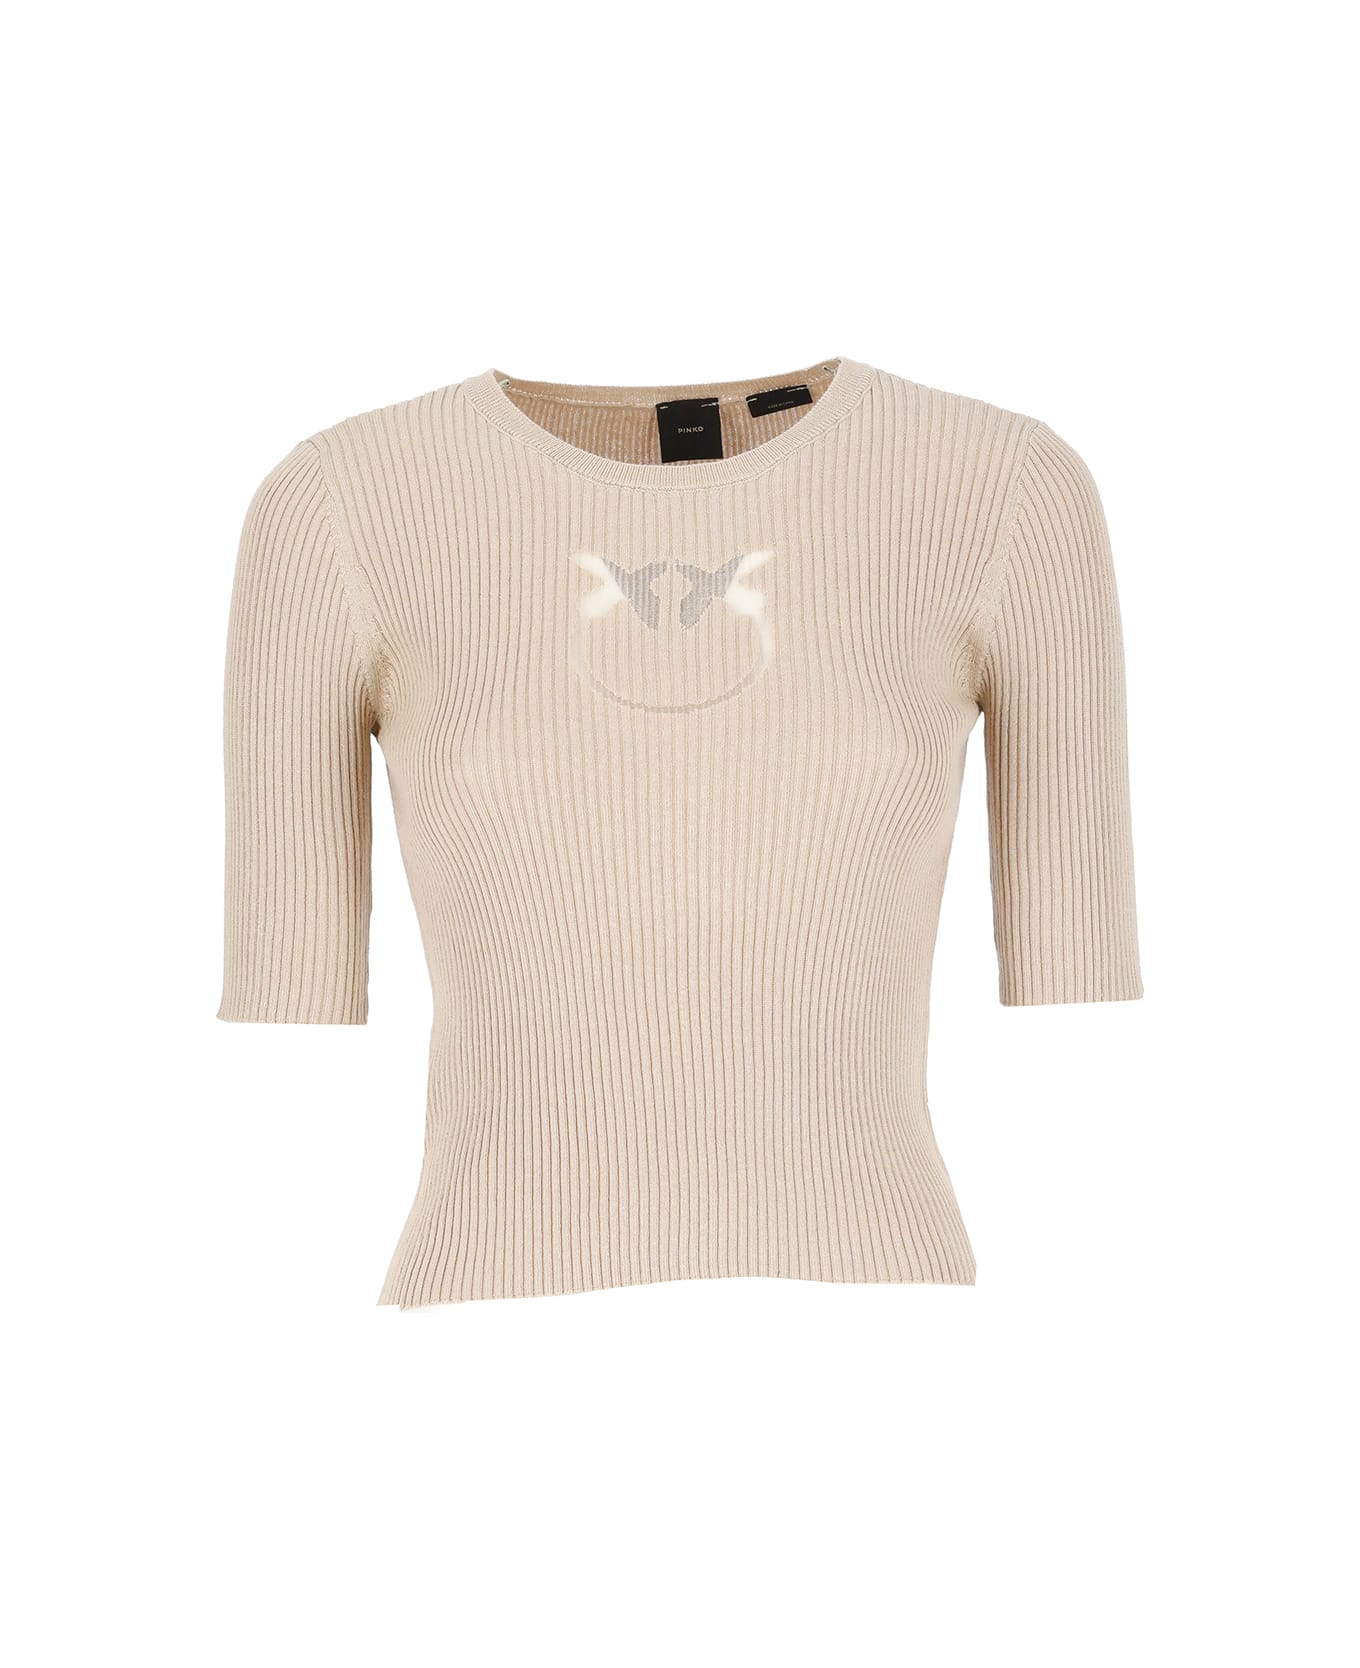 Pinko Ribbed Knit Sweater - Beige